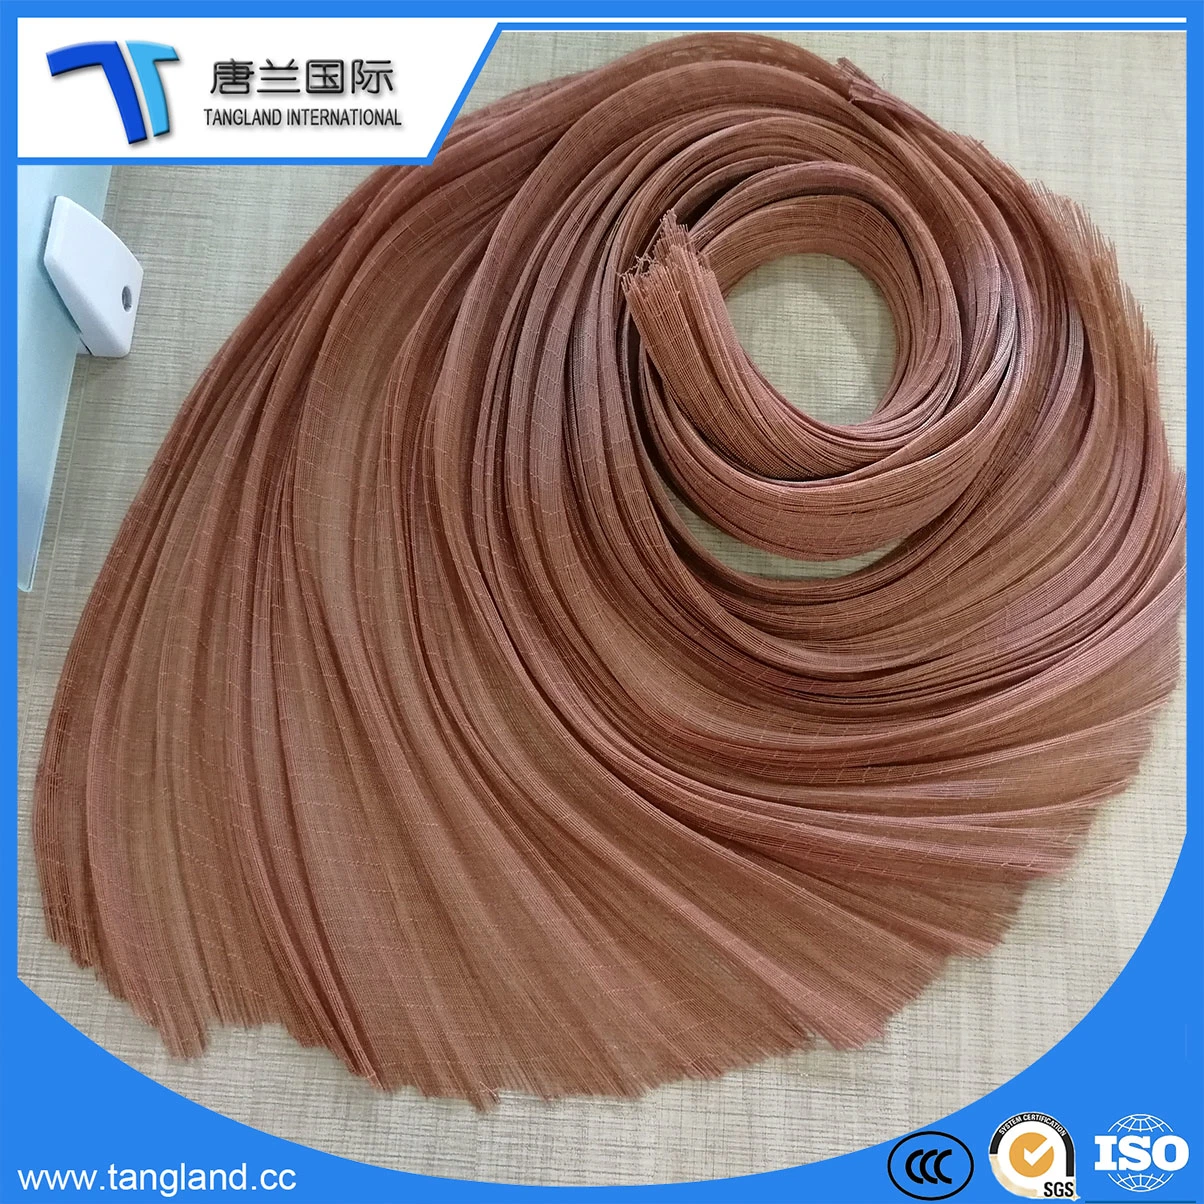 Chinlon Nylon 6 Industrial Friber/Tire/Tyres Dipped Cord Fabric